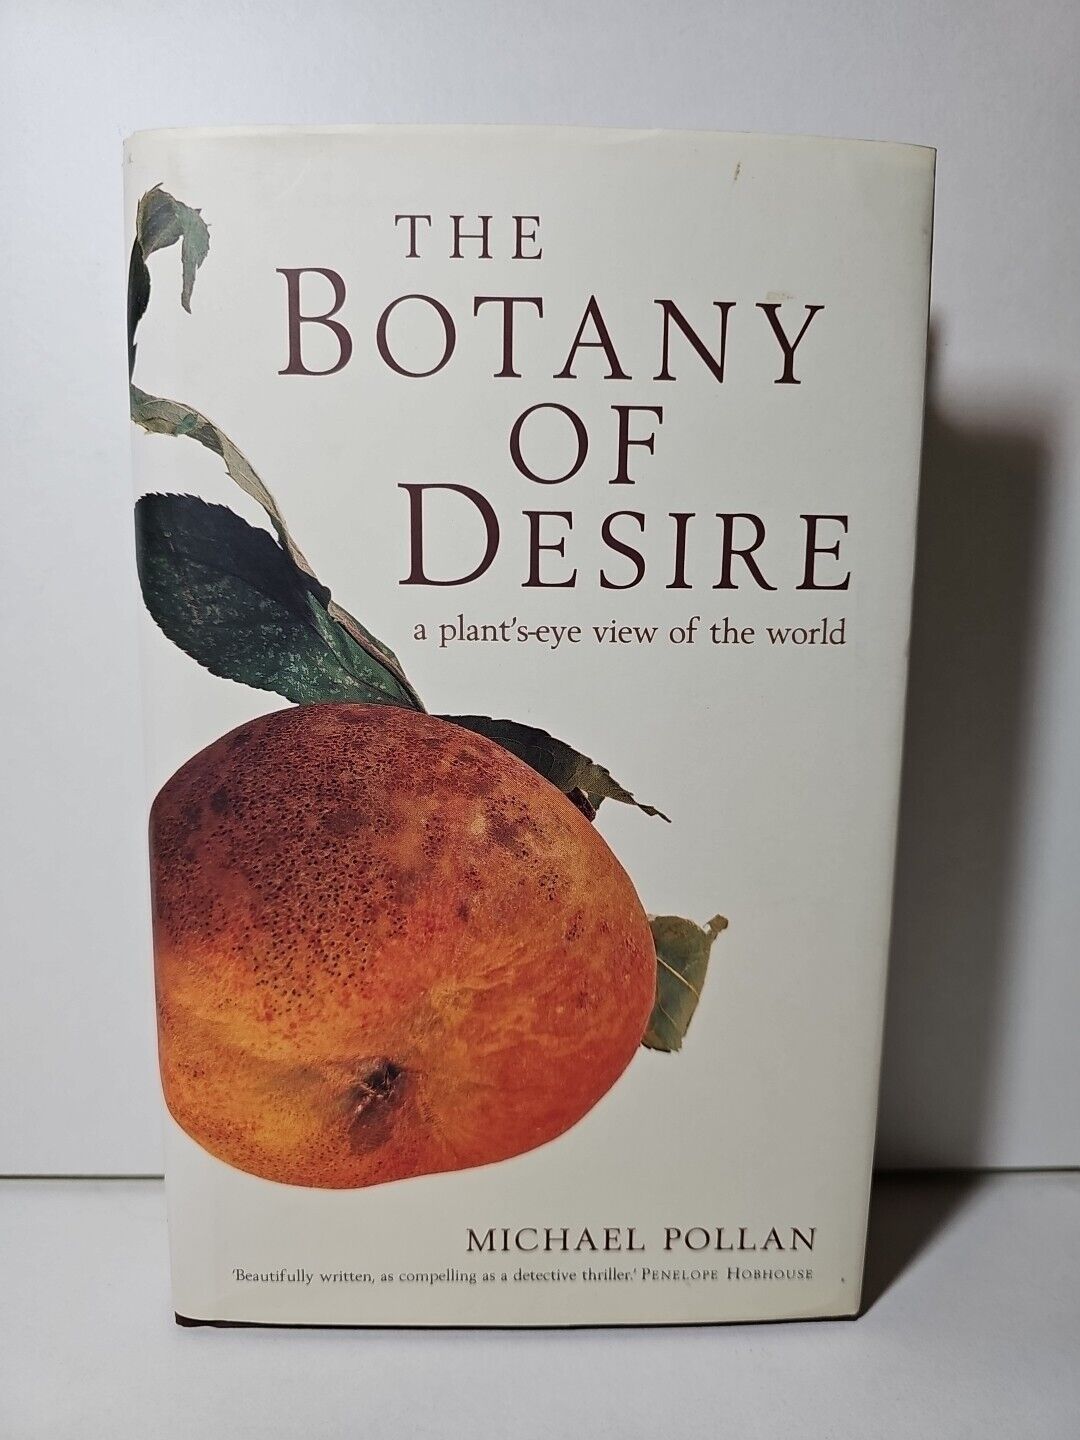 The Botany of Desire: A Plant's-eye View of the World by Michael Pollan...